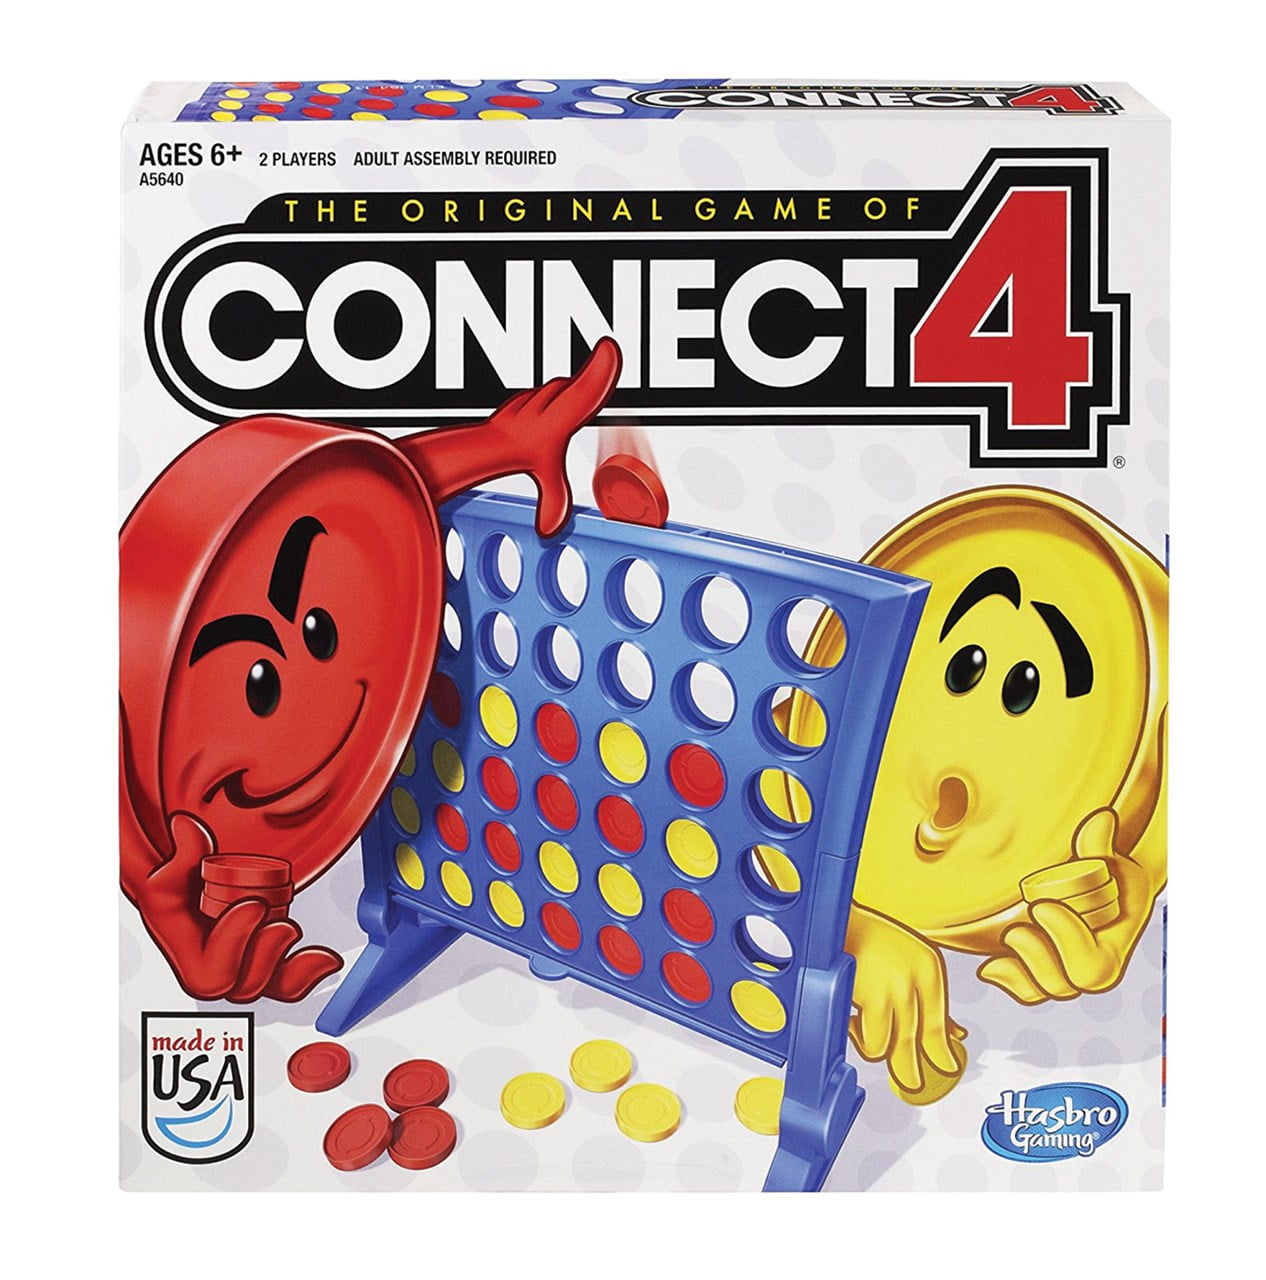 Hasbro Connect 4 Gaming Road Trip Walmart Portable Case 2017 for sale online 